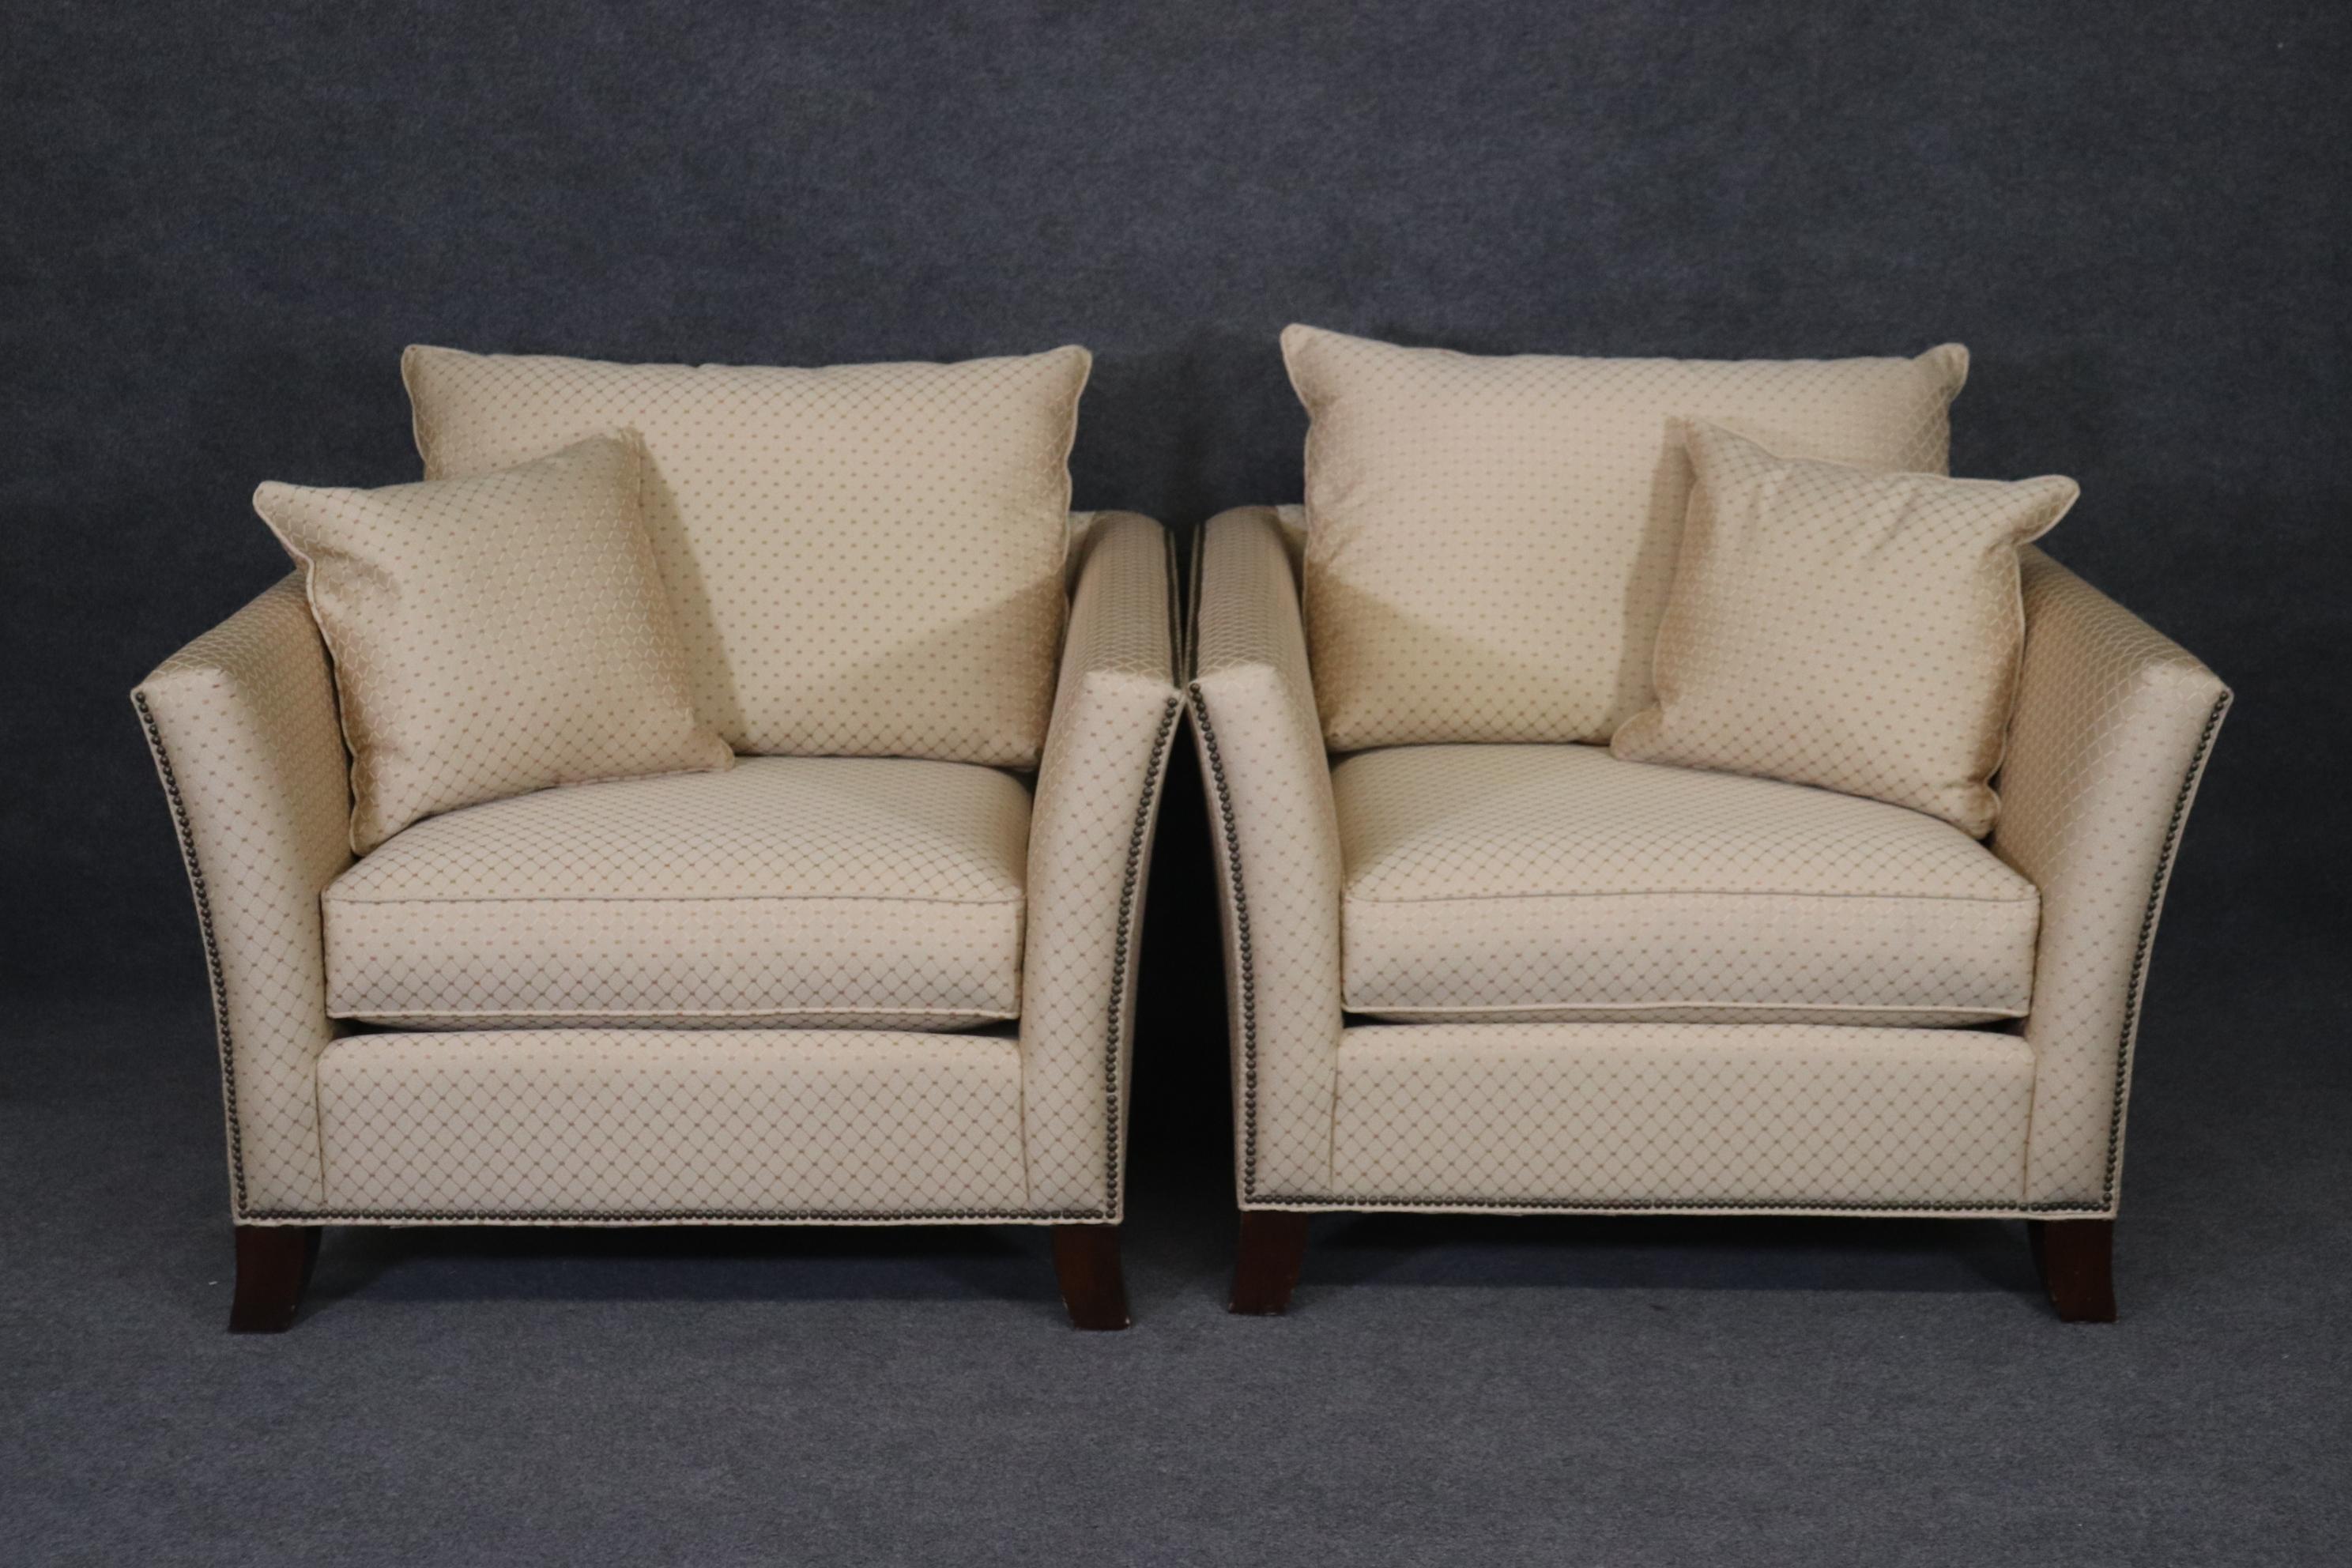 This is a beautiful and very clean pair of cream or creme colored upholstered club chairs of generous over-sized dimensions. The upholstery is very clean for a used pair of chairs and while very clean, nothing used is perfect but these are very good.